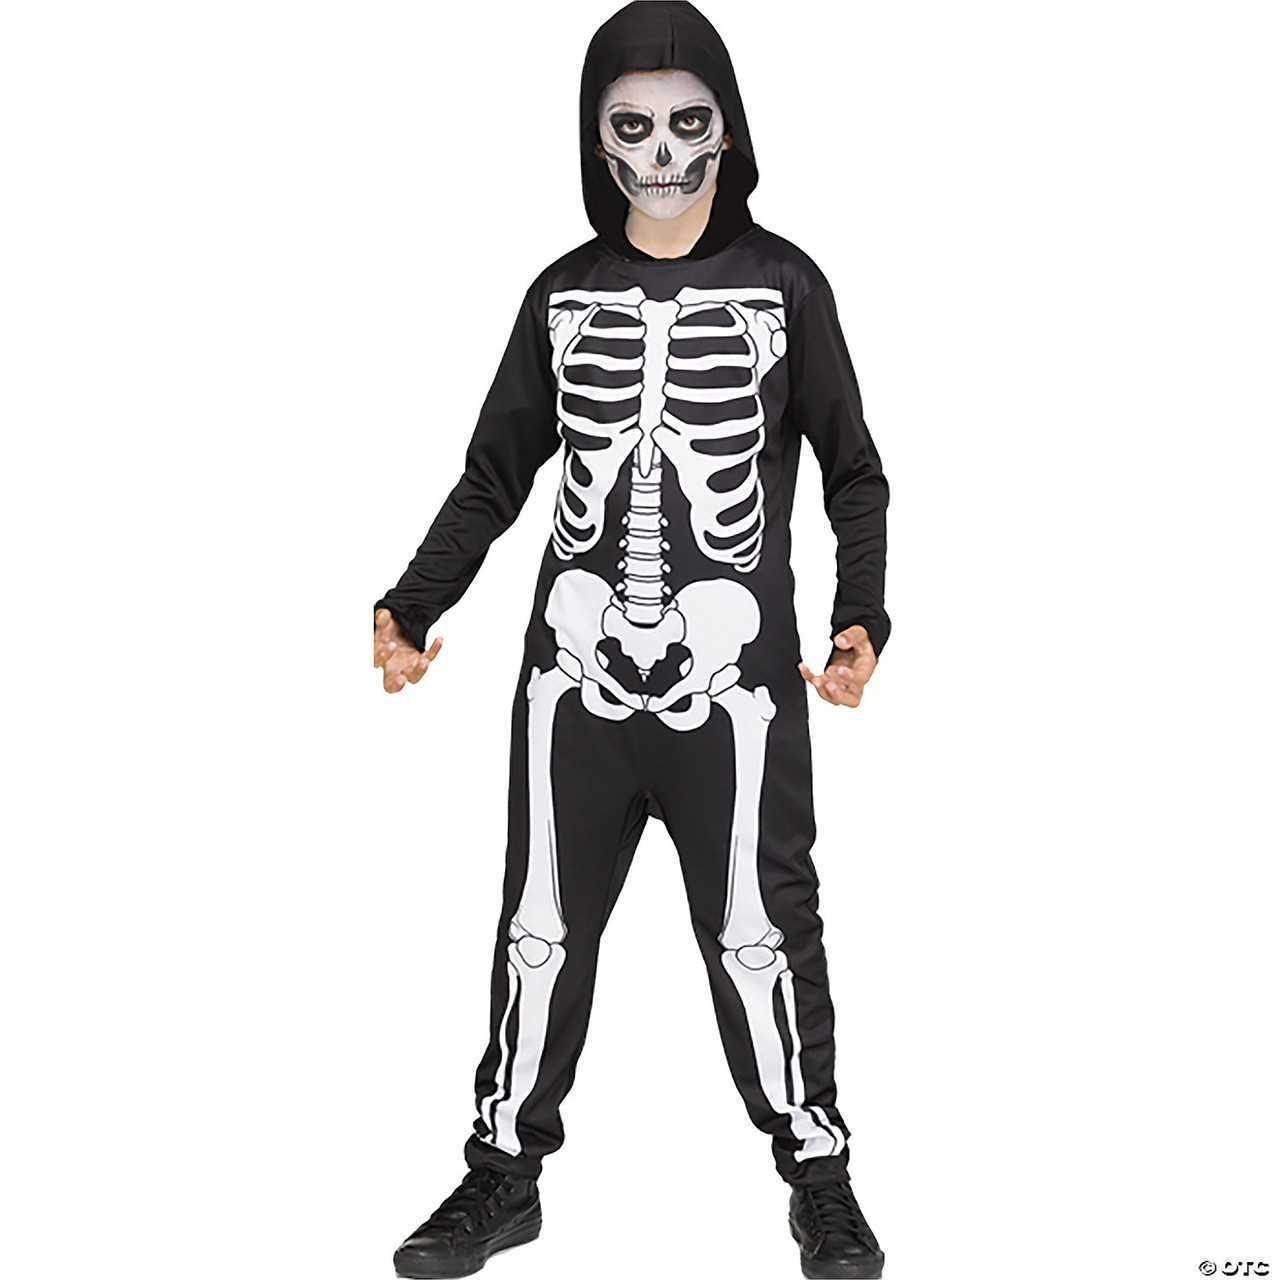 Shop Costumes for Kids - Halloween & More - Fantasy Costumes